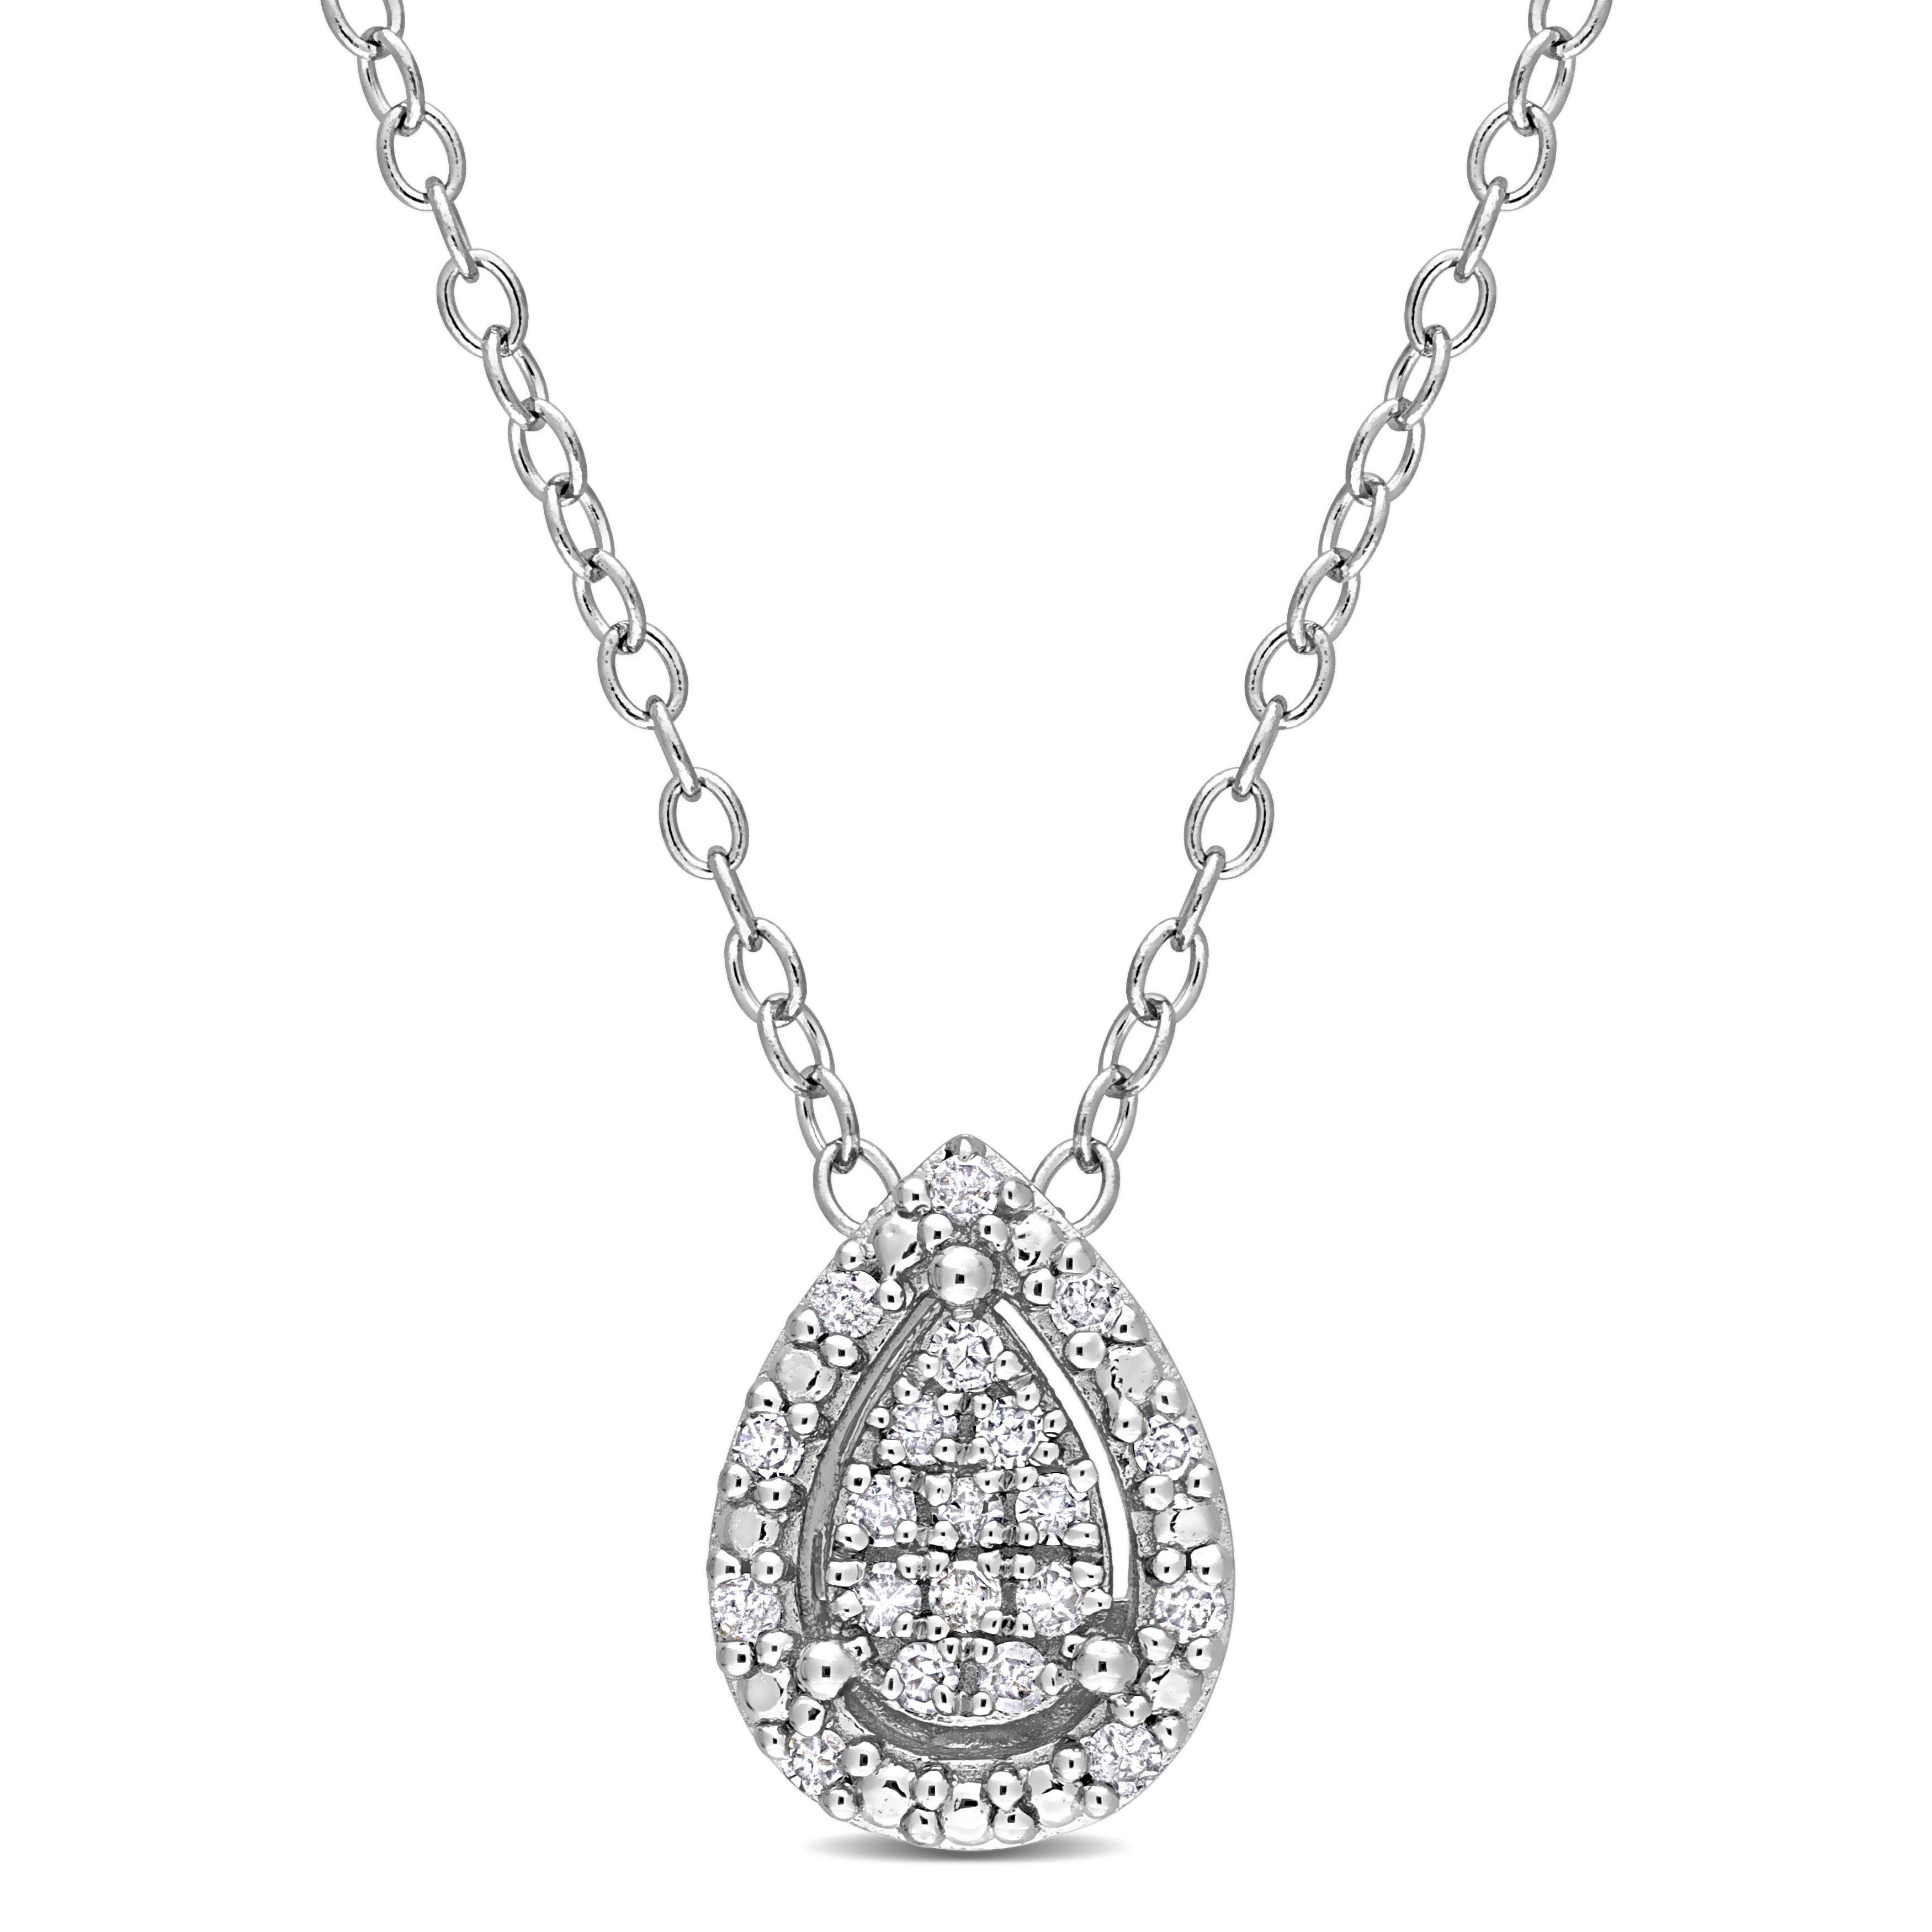 1/10 CT TW Diamond Teardrop Halo Pendant With Chain in Sterling Silver - 18 in.